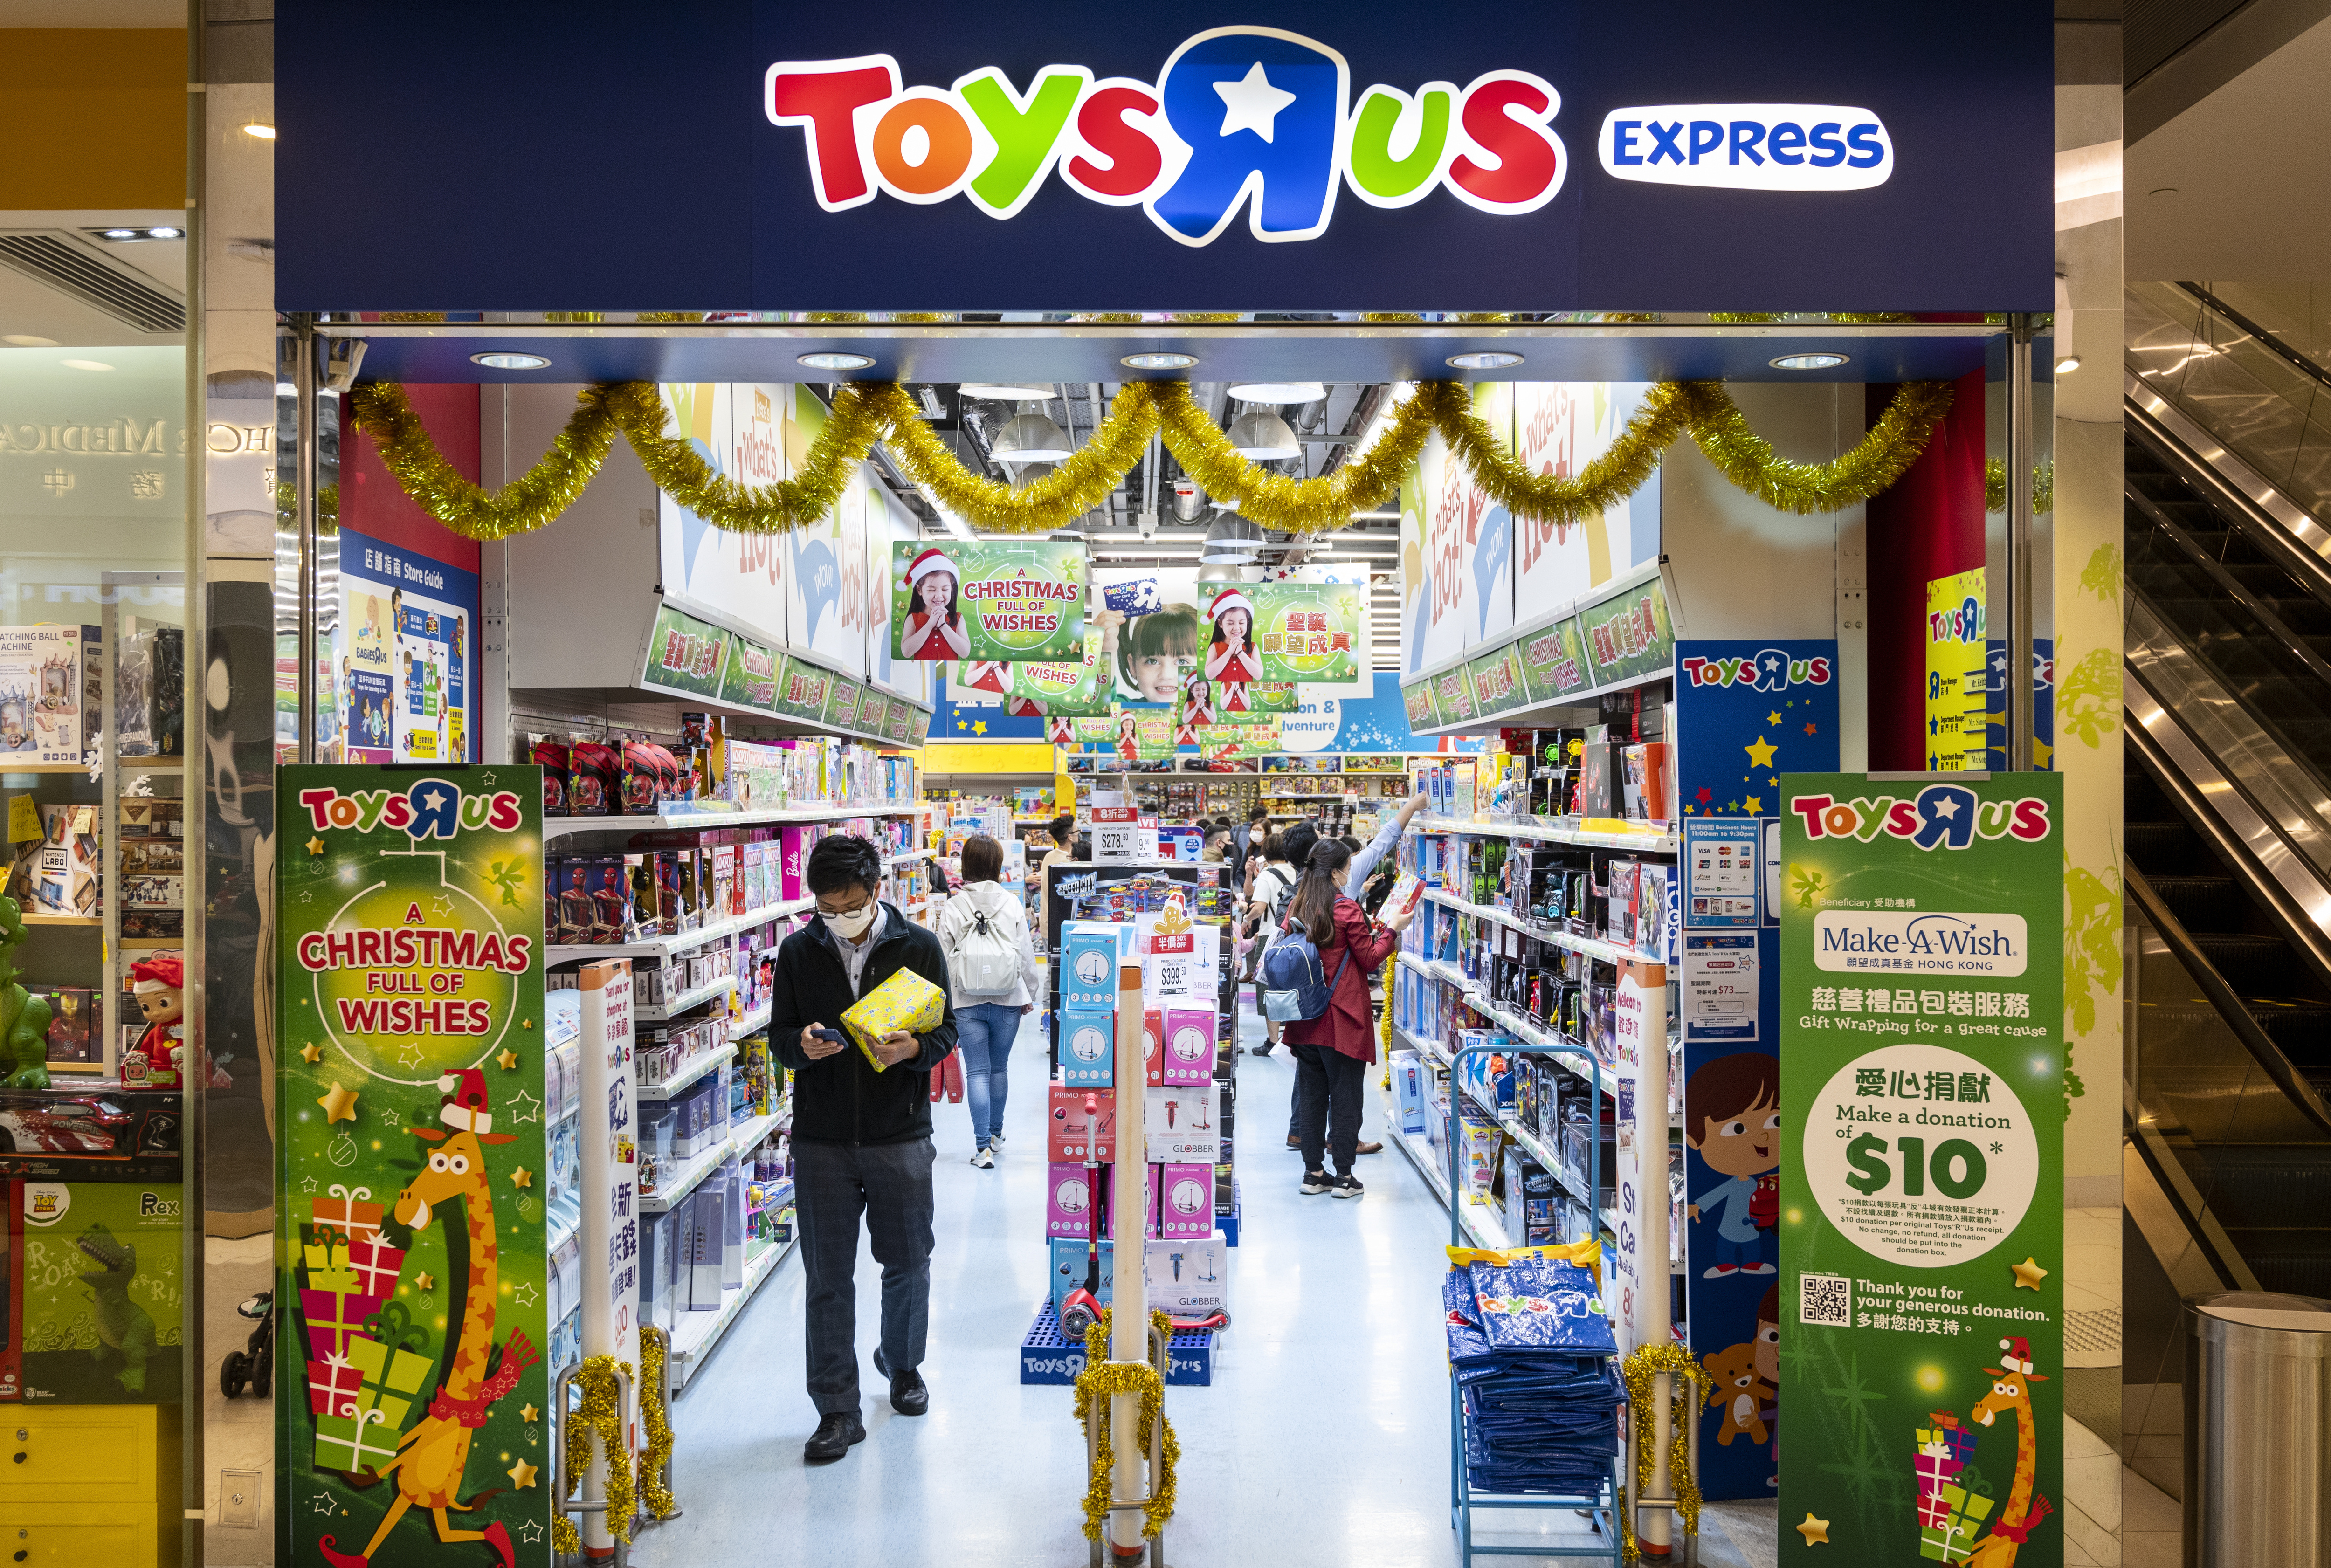 Toys R Us will launch 30 stores by August, bosses confirmed